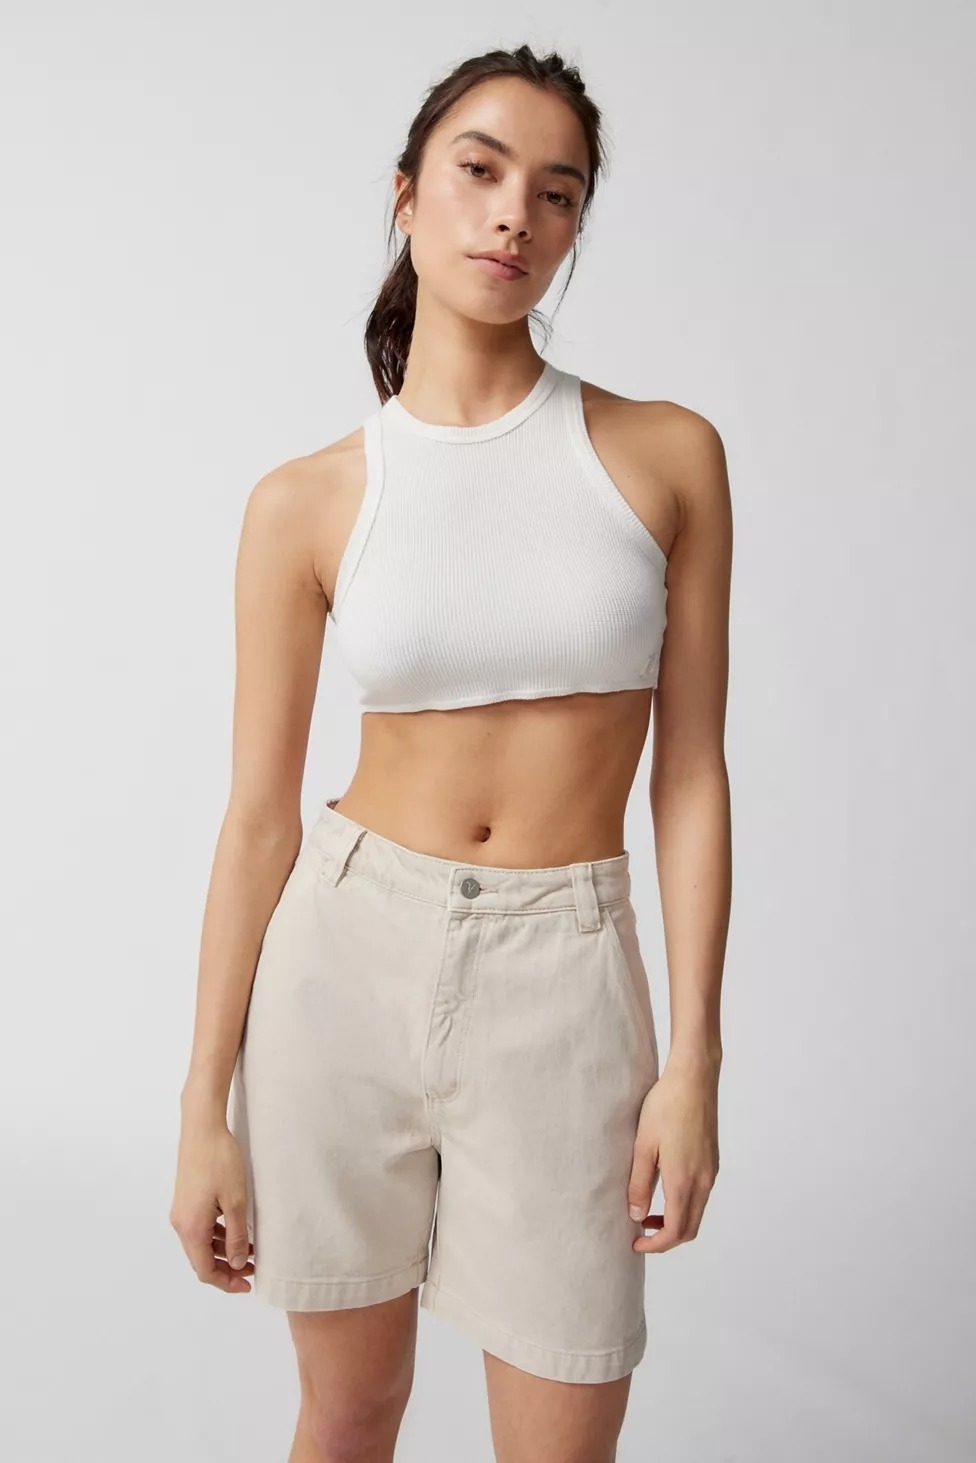 Model wearing beige mid-thigh shorts with white crop top